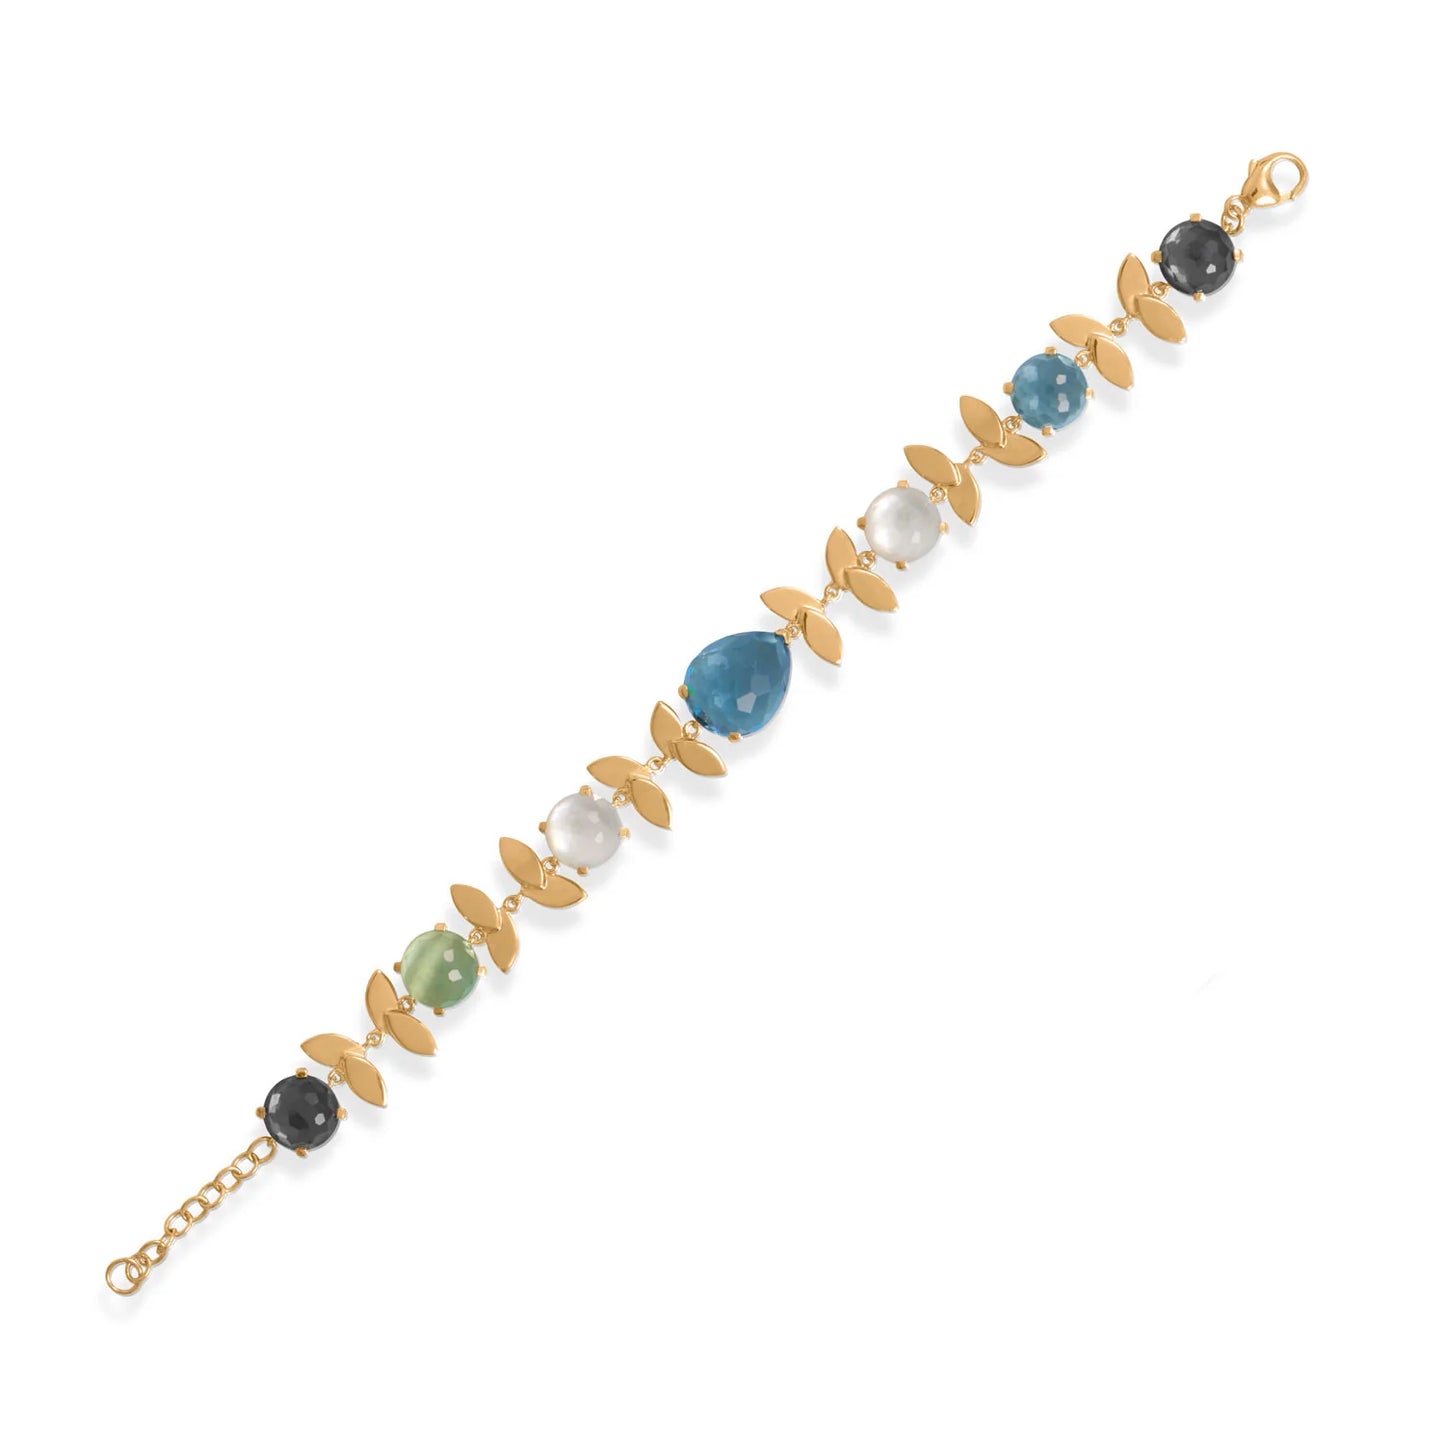 6.5" + 1" 14K Gold Plated Multi Stone Bracelet with Lovely Leaves!